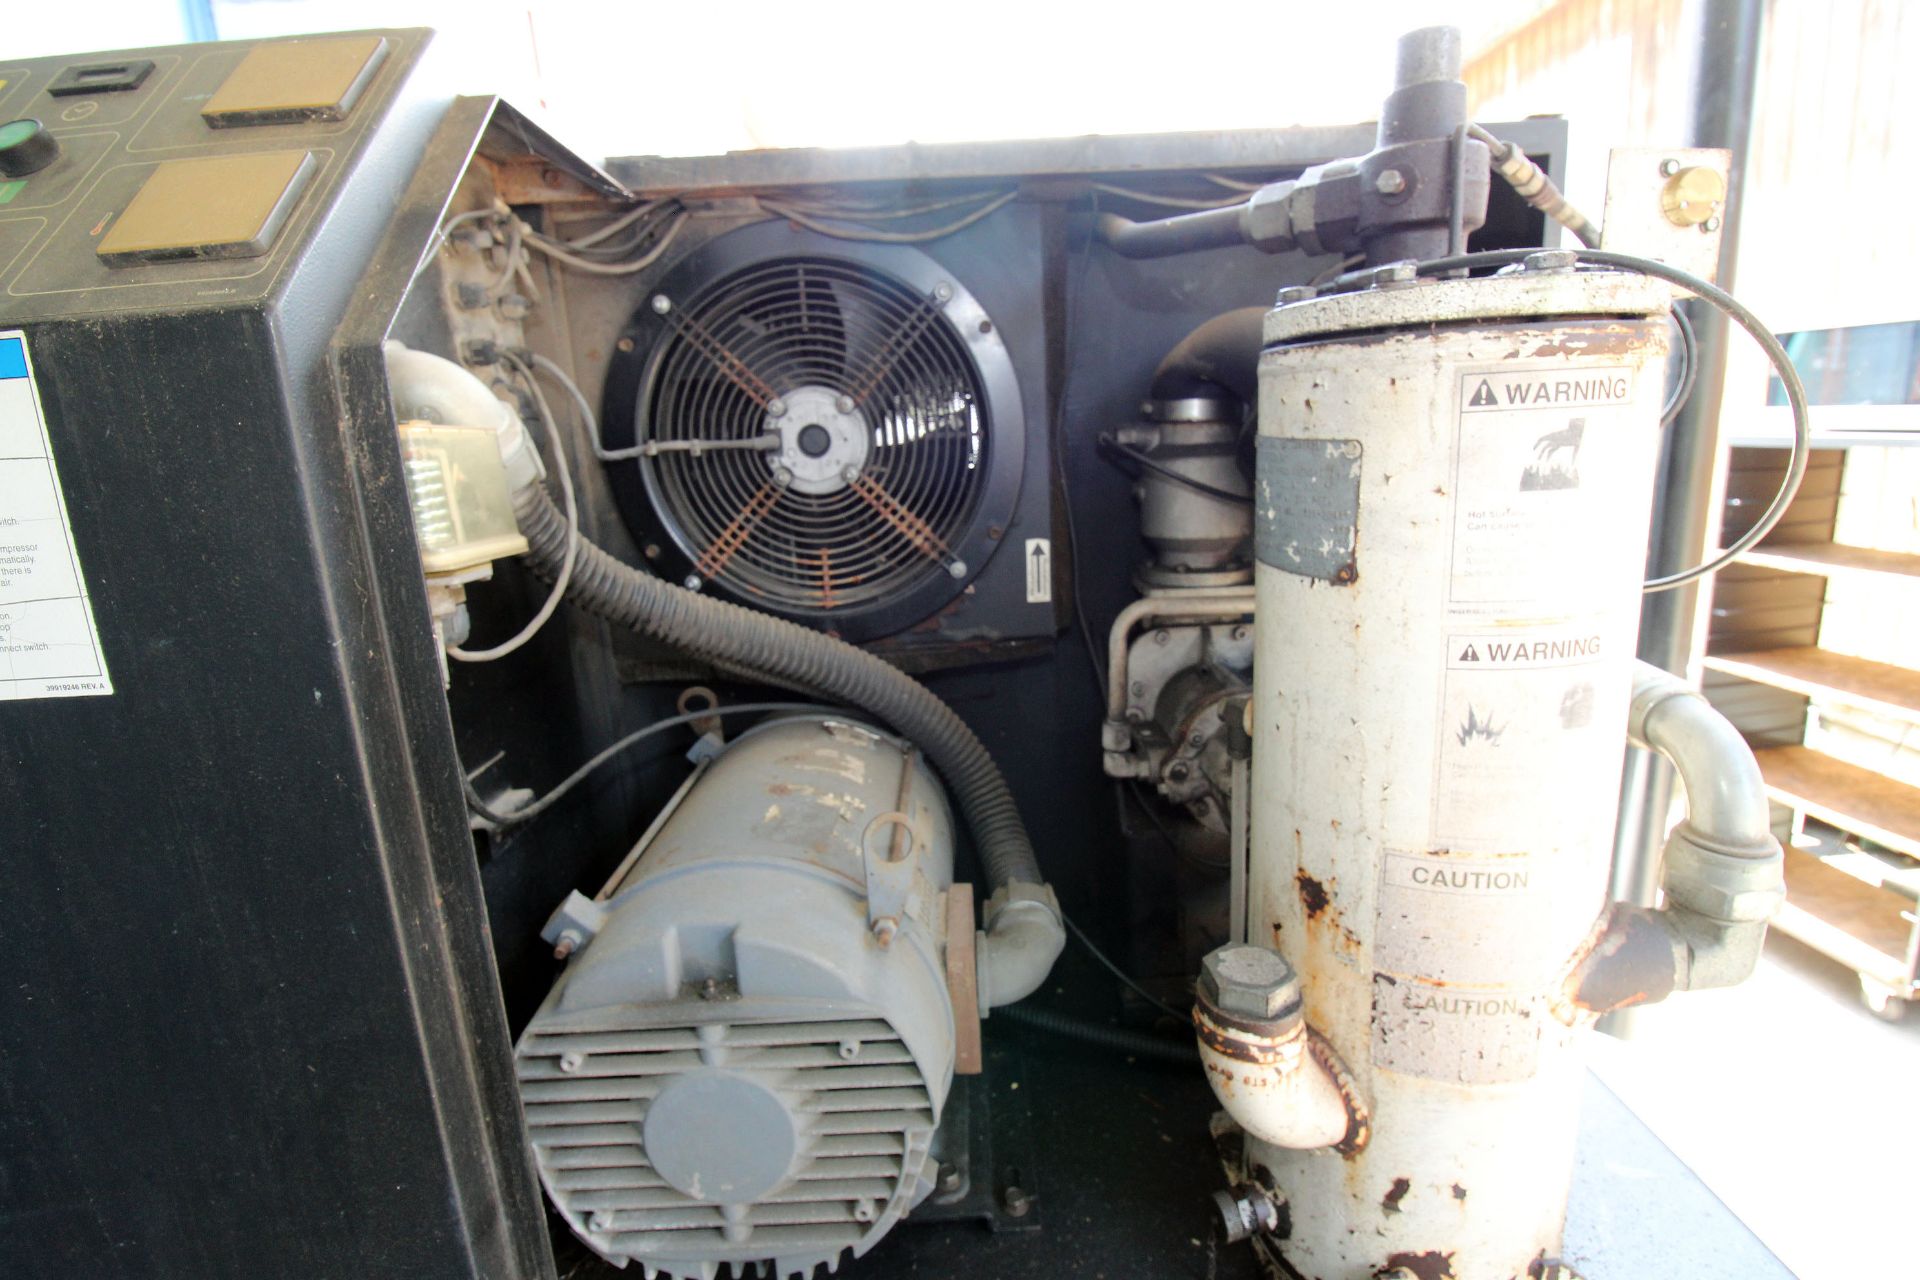 ROTARY SCREW AIR COMPRESSOR, INGERSOLL RAND MDL. SSR-EP25, new 2000, 97 CFM, 25 HP motor, 90 gal. - Image 2 of 7